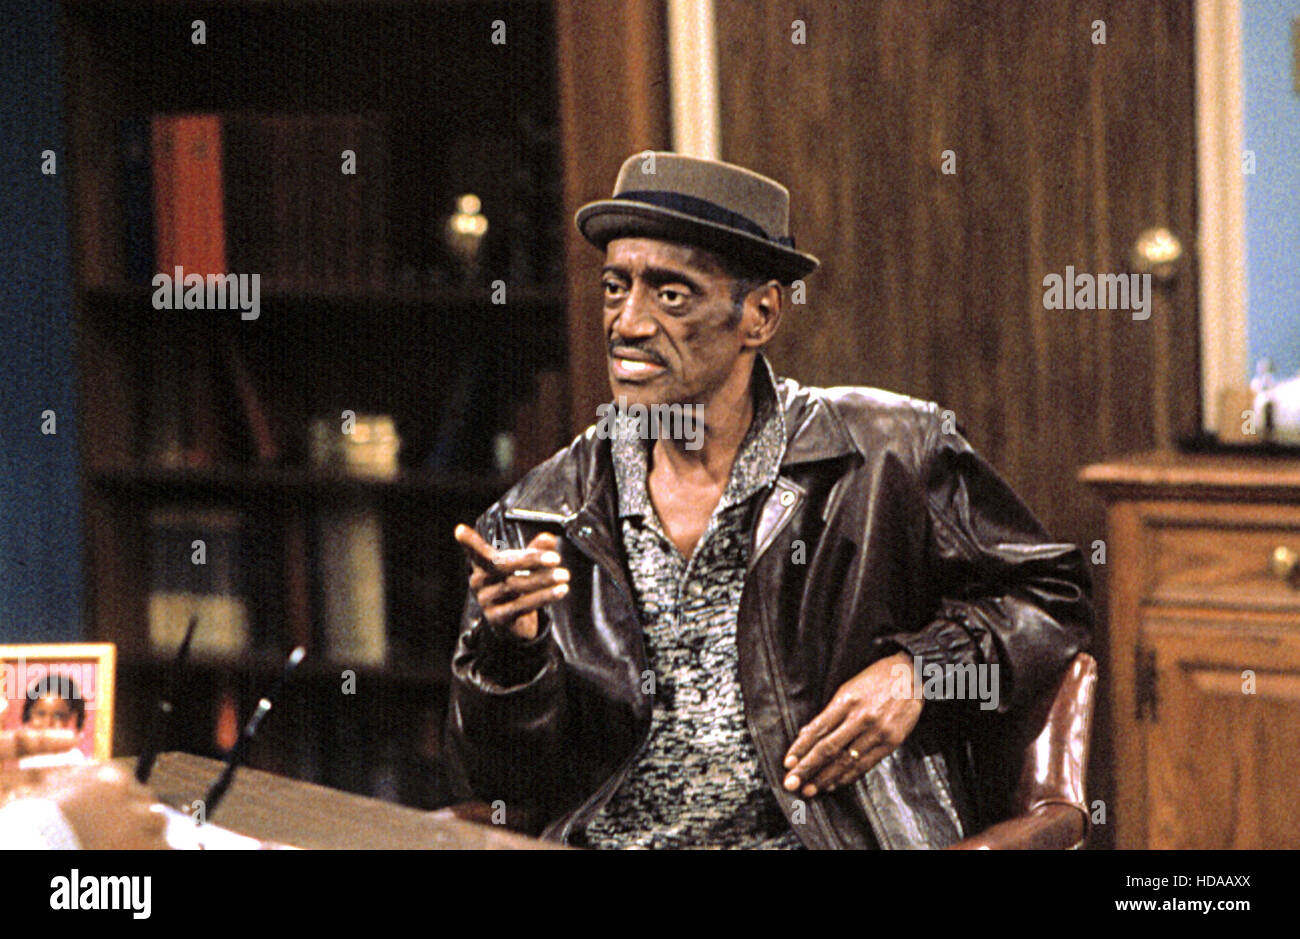 THE COSBY SHOW, Sammy Davis Jr., 1984-92, yr. episode 'No Baby' aired 2/6/89, © NBC / Courtesy: Everett Collection Stock Photo - Alamy